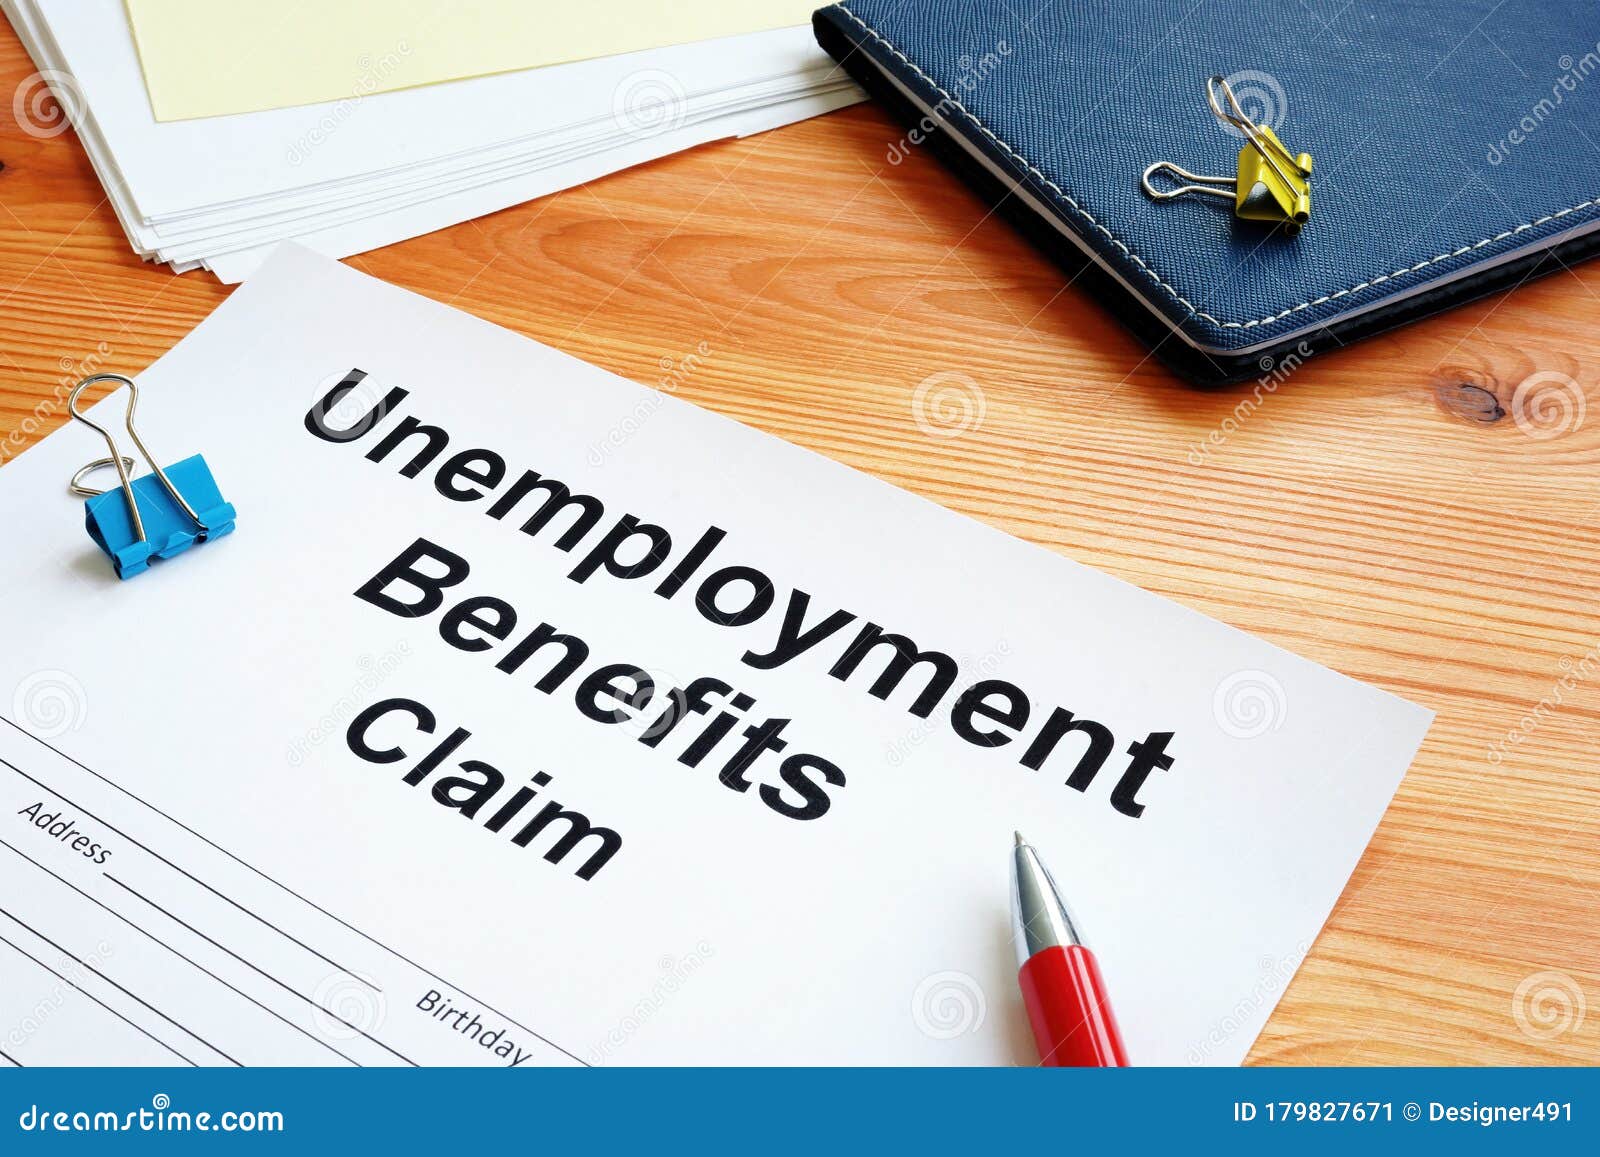 unemployment benefits claim and stack of papers